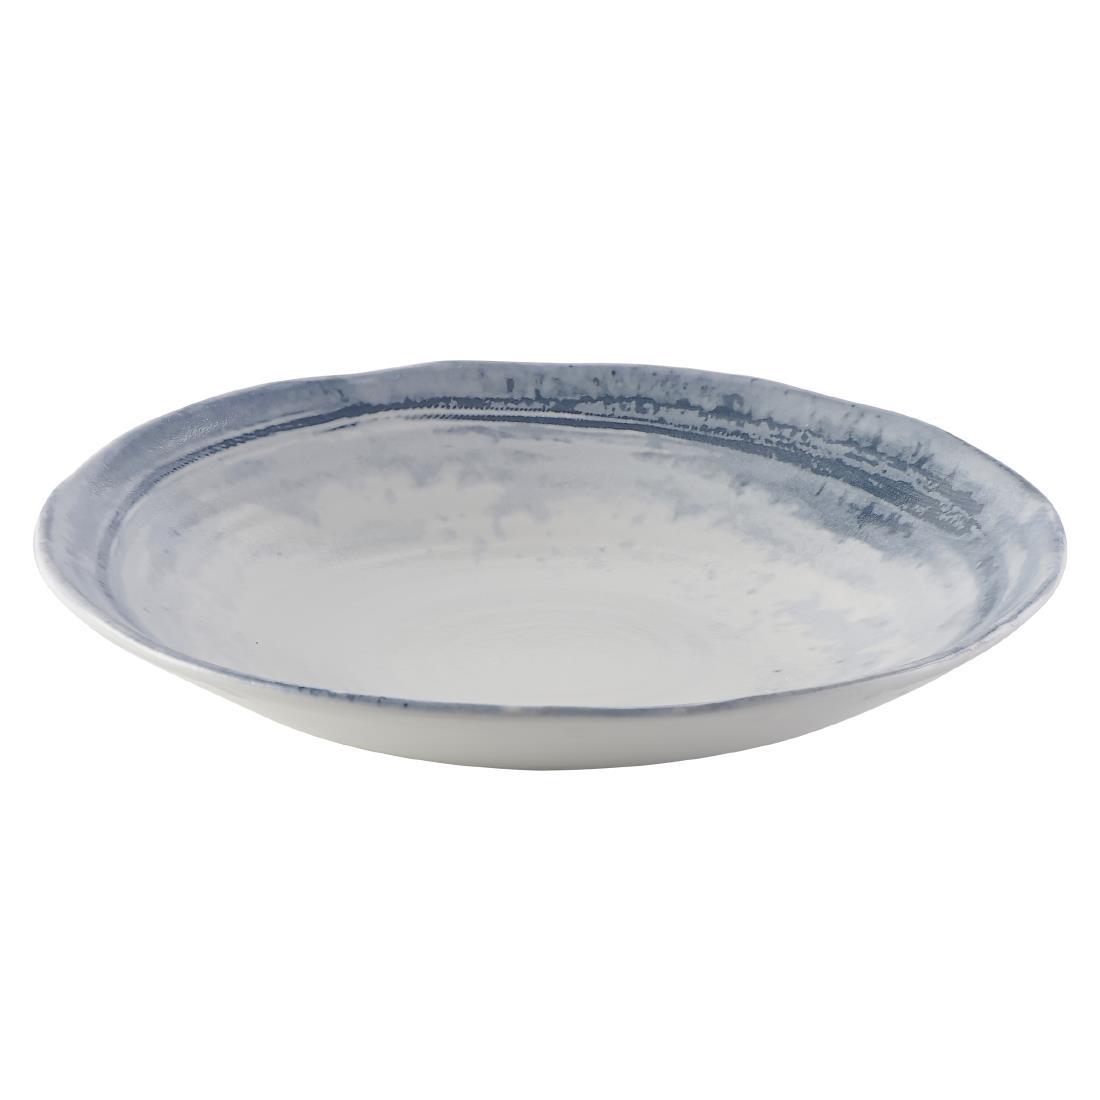 Dudson Makers Finca Limestone Organic Coupe Bowl 279mm (Pack of 12) - FS760  - 2